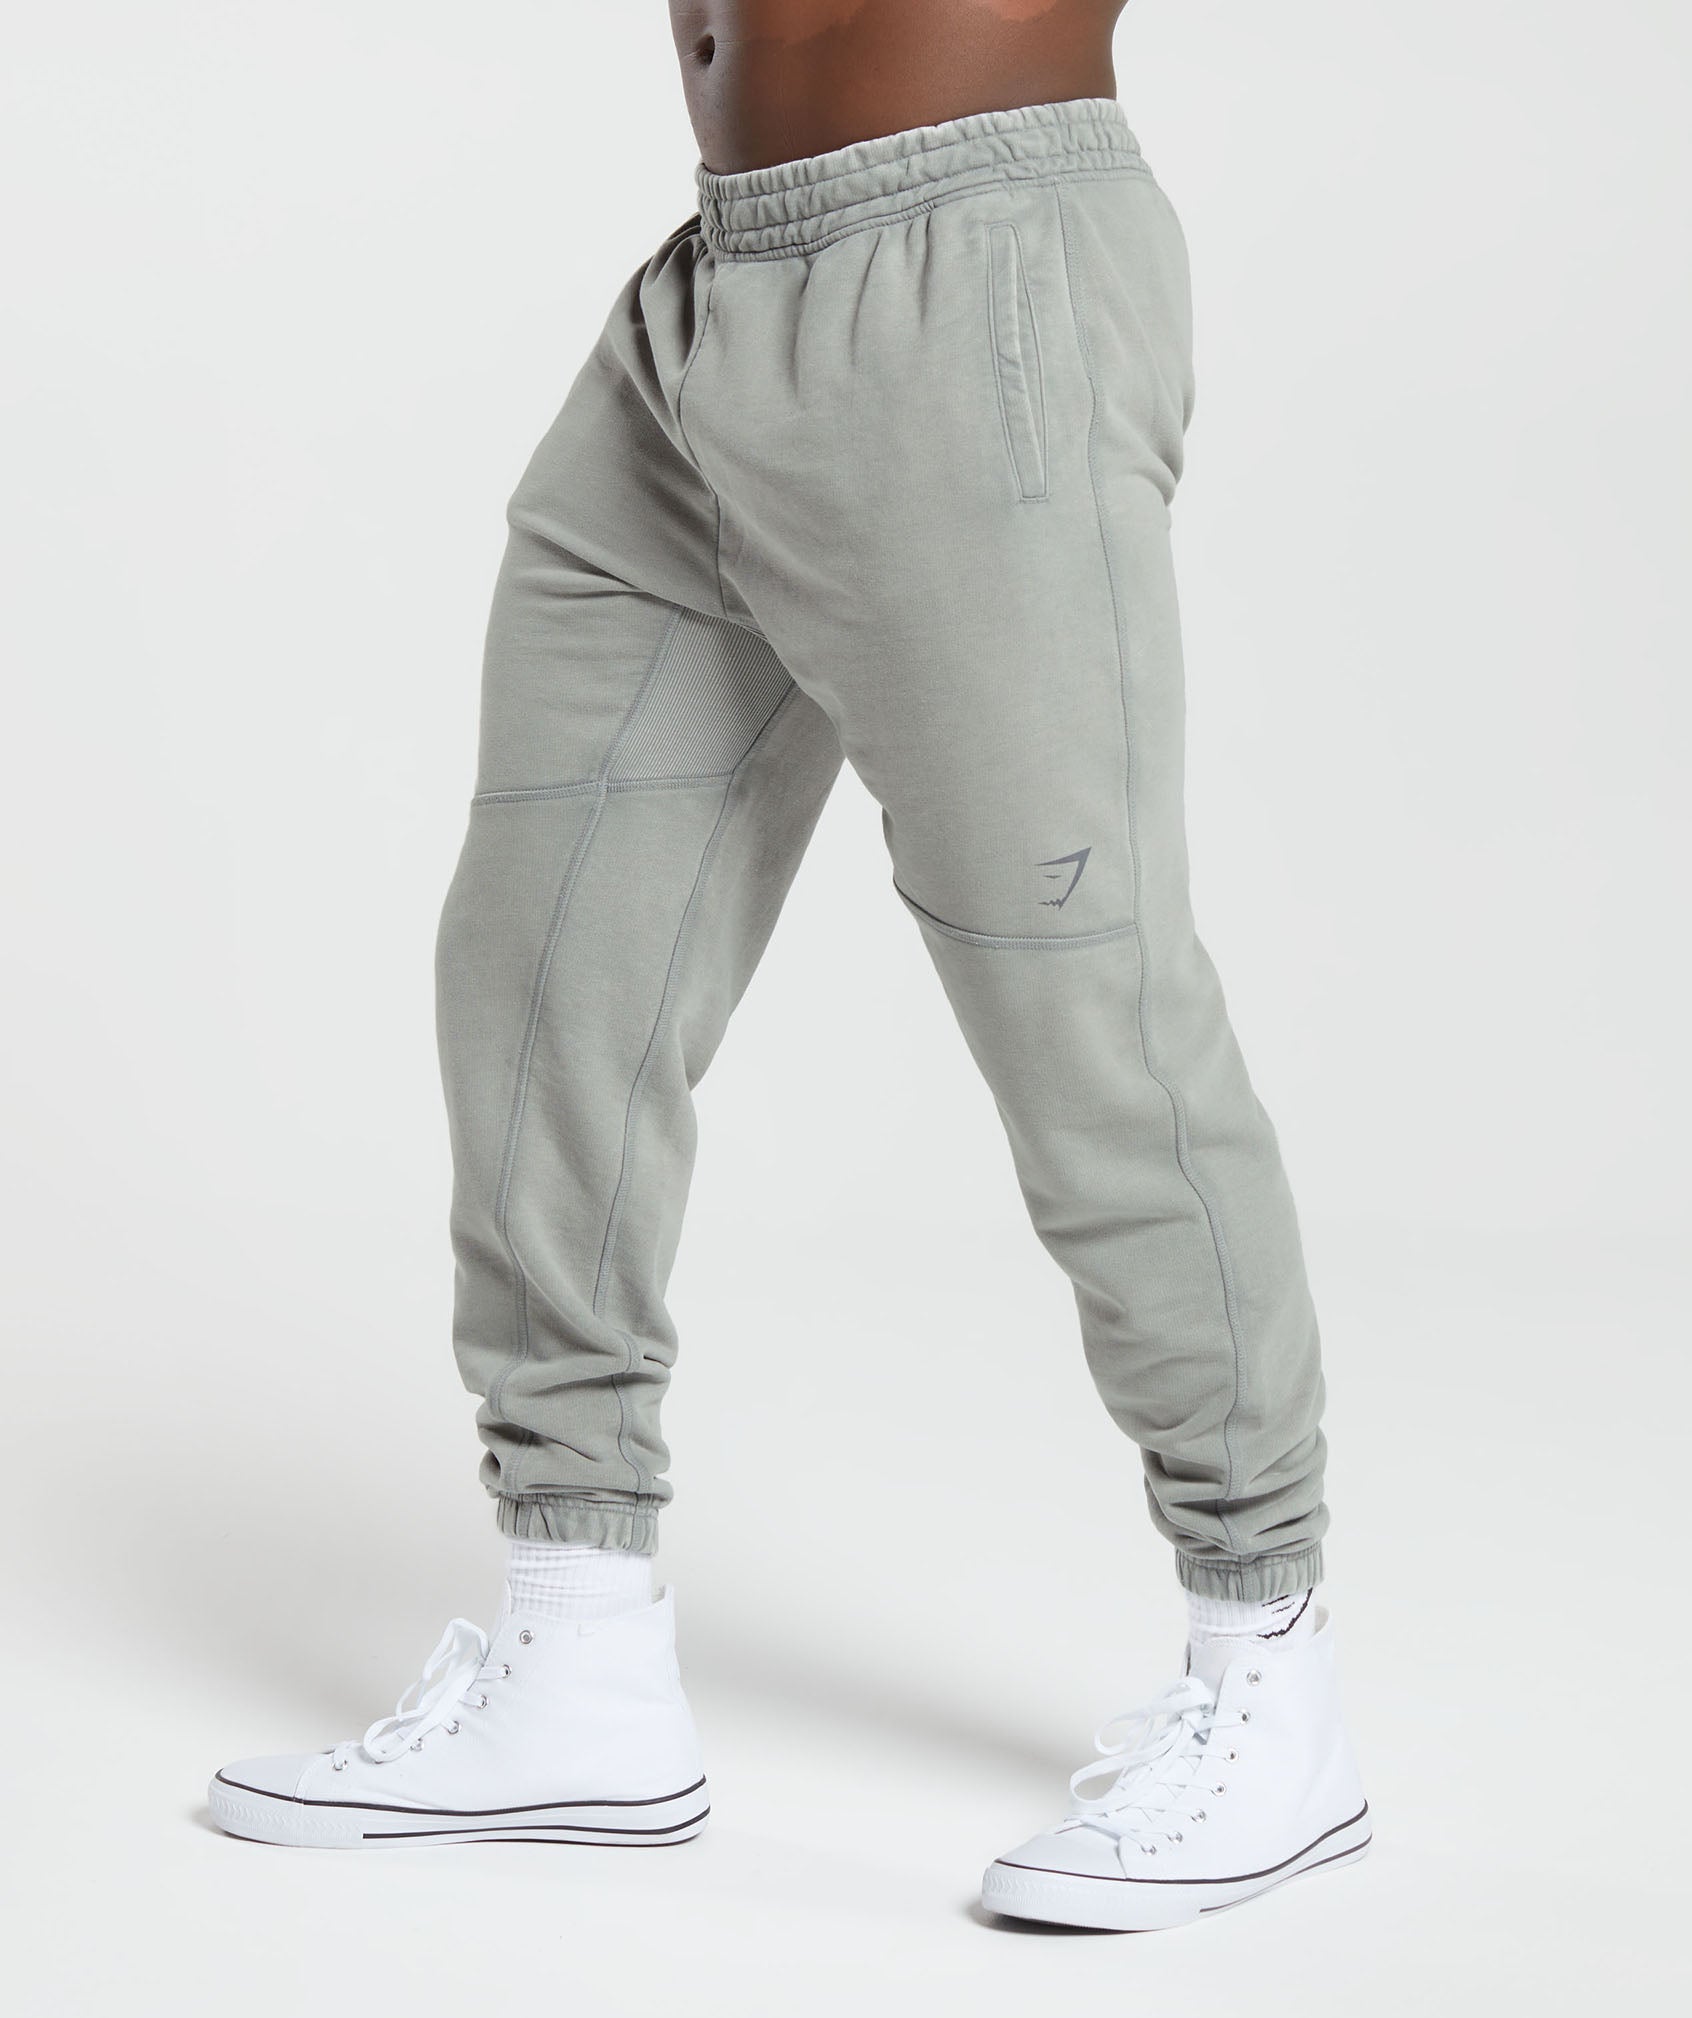 Heritage Joggers in Smokey Grey - view 3